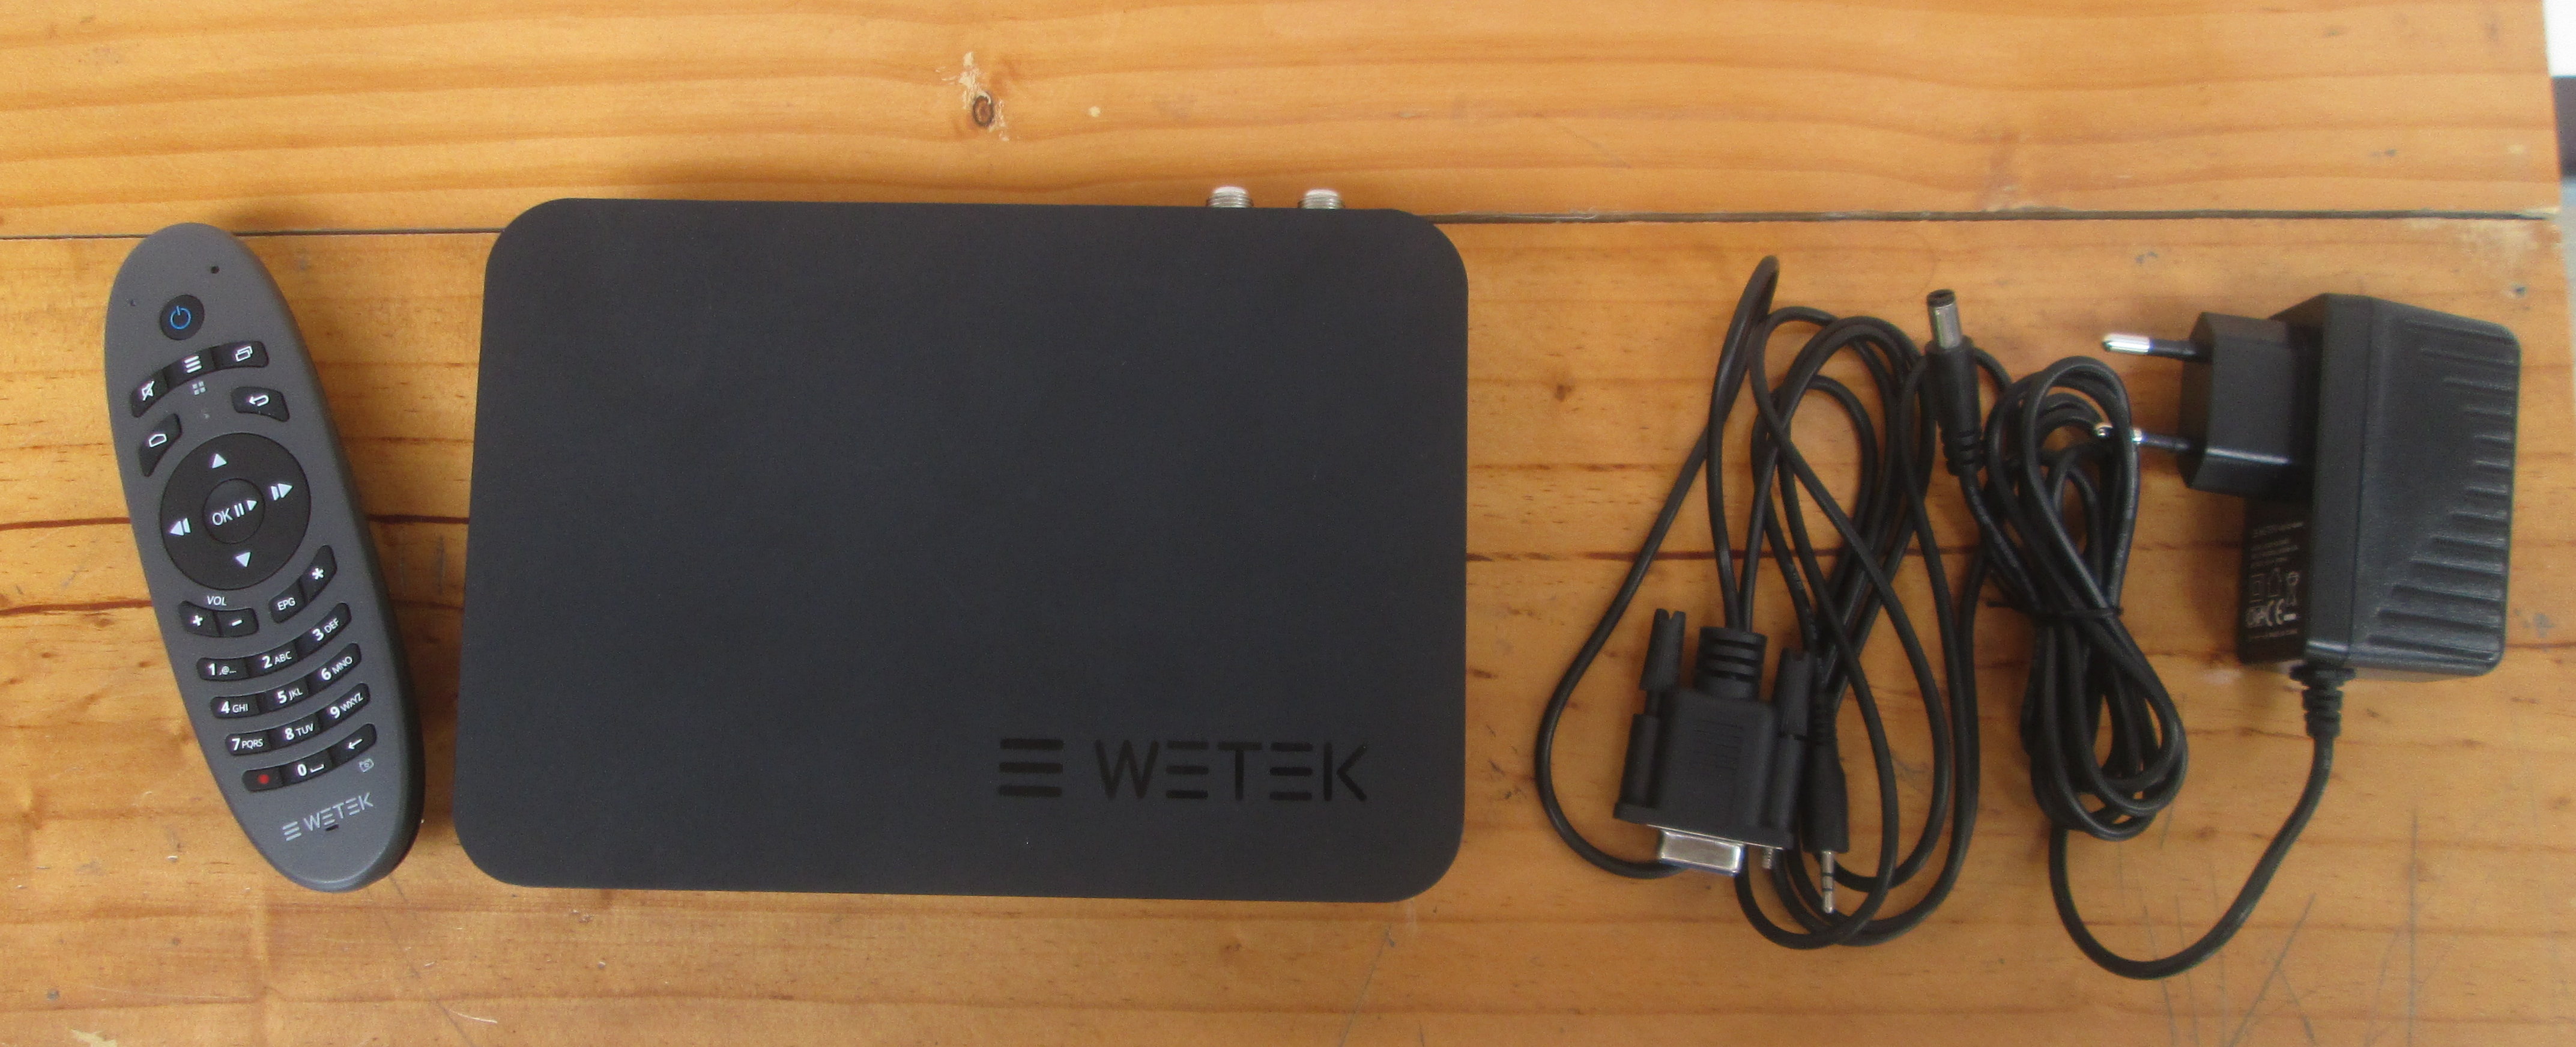 Unboxing of WeTek Play DVB-S2 Android / Linux STB - CNX Software